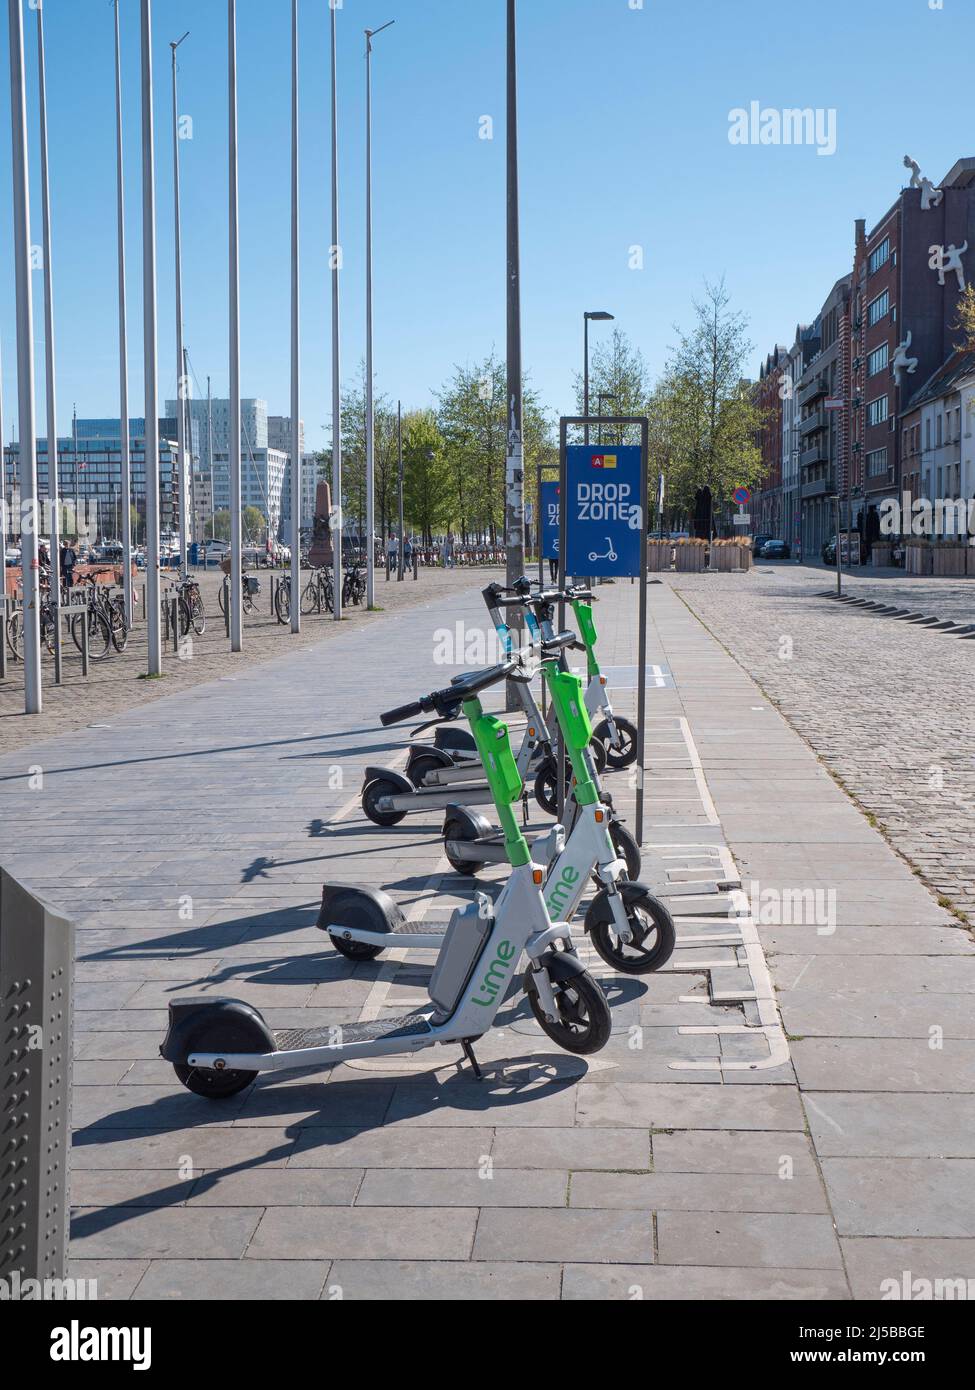 Antwerp, Belgium, April 17, 2020, Share scooters in the city of Antwerp at a drop zone Stock Photo